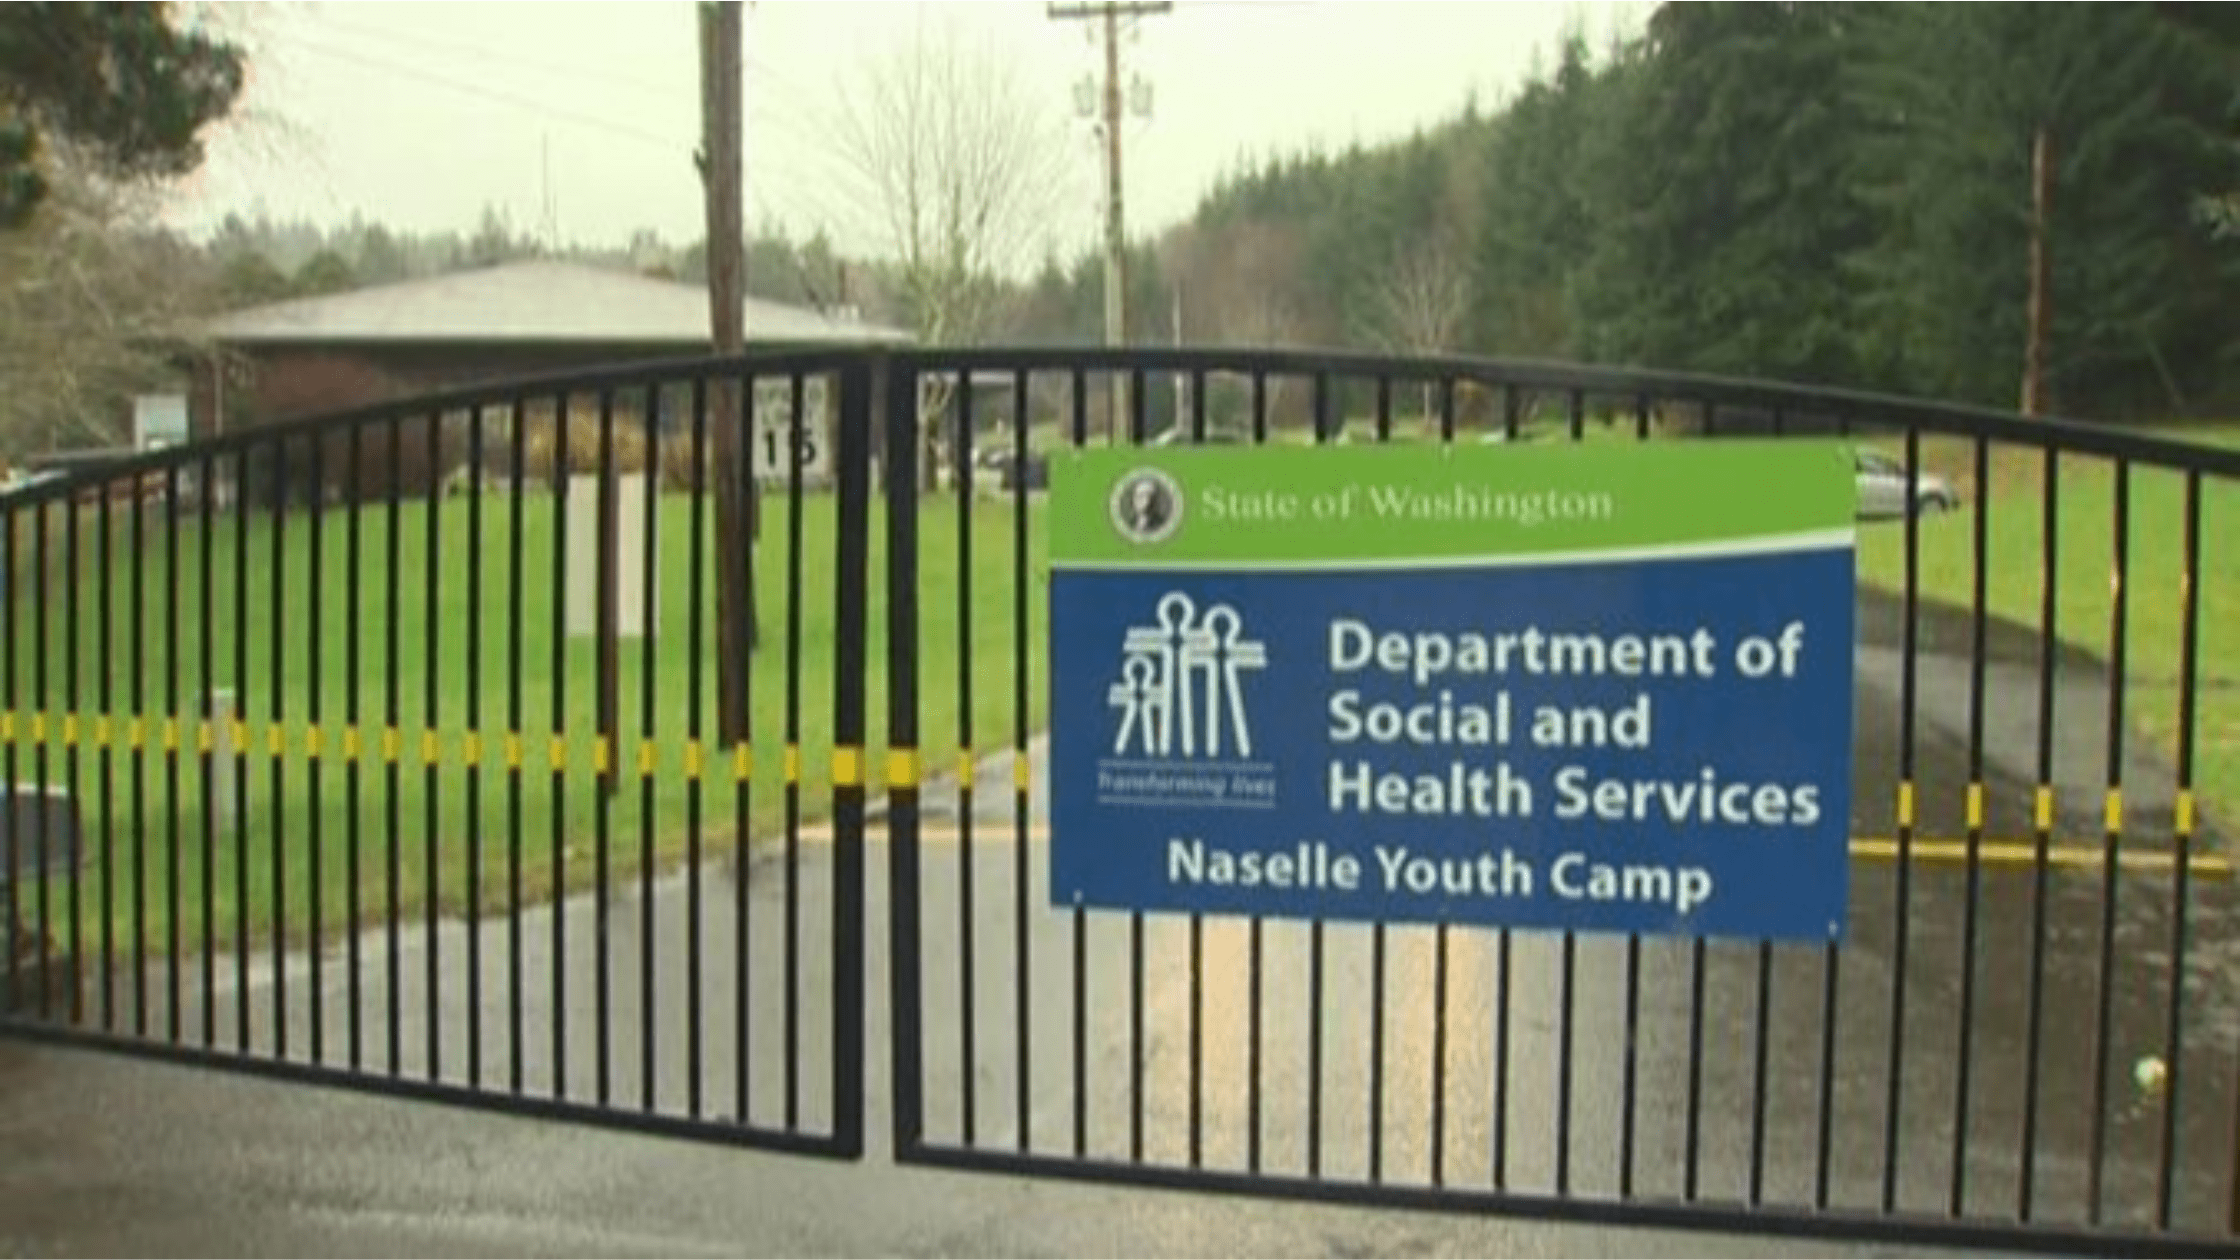 A building and lawn are pictured behind a closed gate. The sign on the gate reads: State of Washington - Department of Social and Health Services - Naselle Youth Camp.